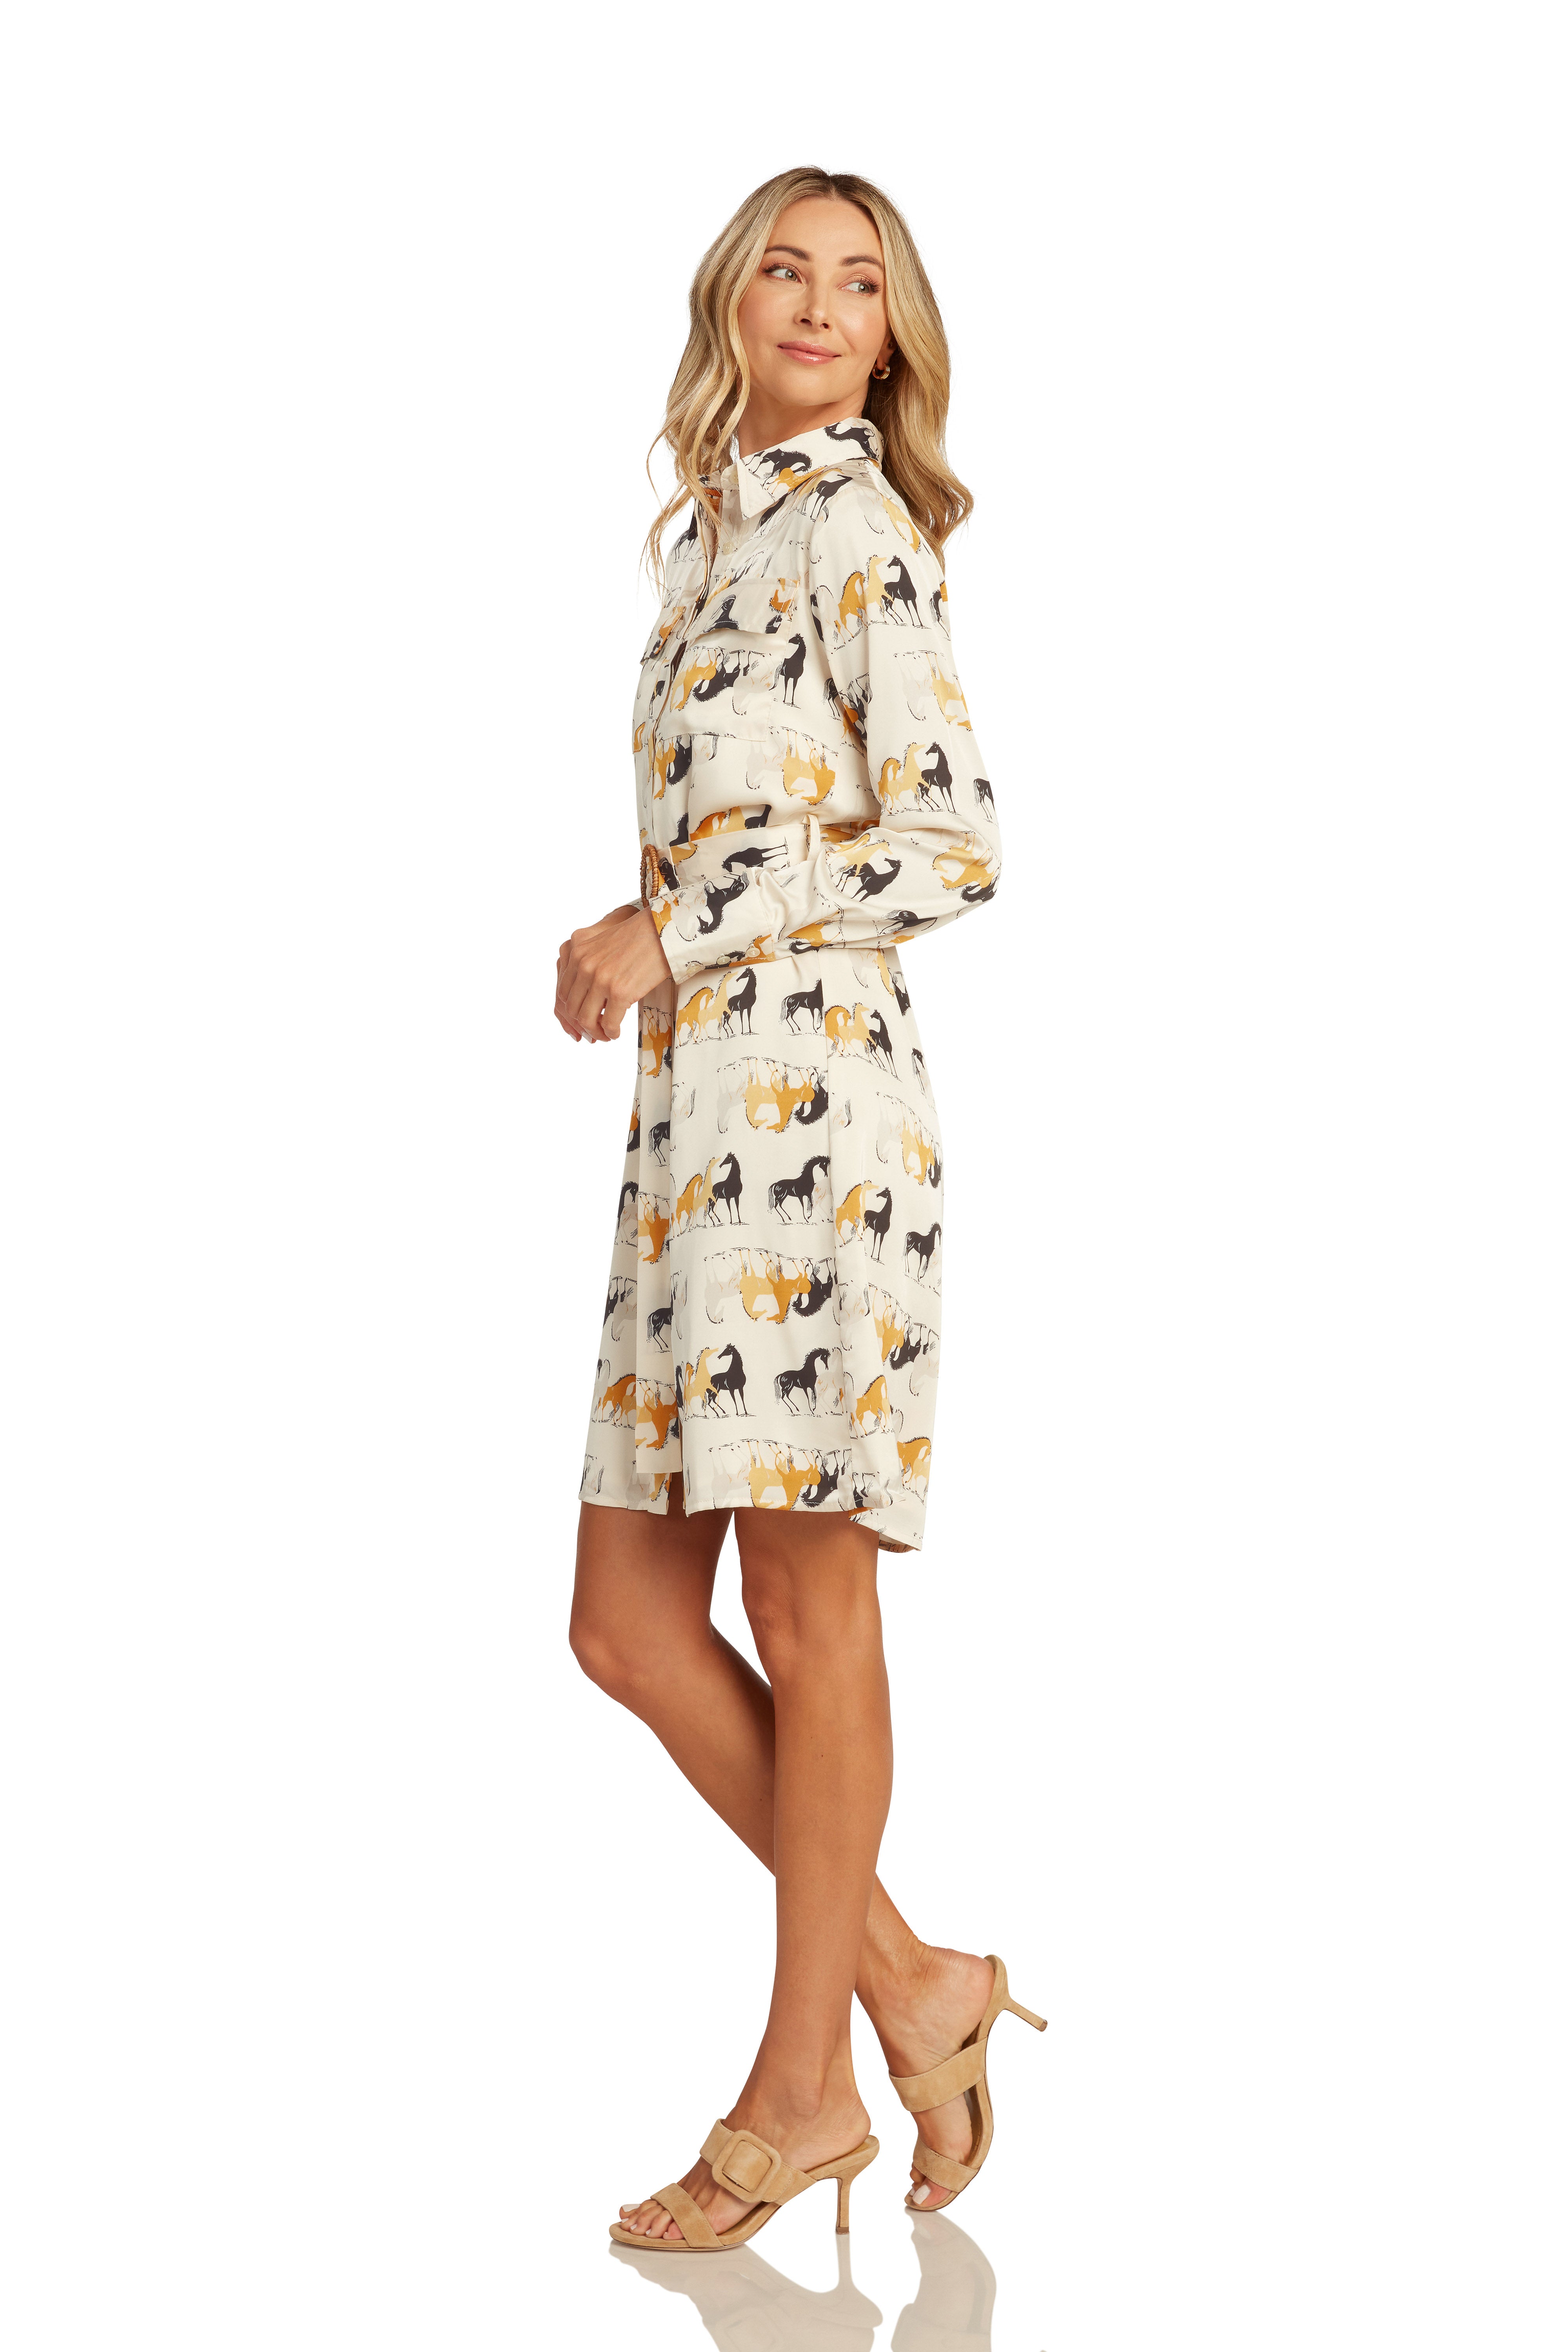 SPRING DRESS EVENT BLAKESLEY BUTTON FRONT DRESS-PONY